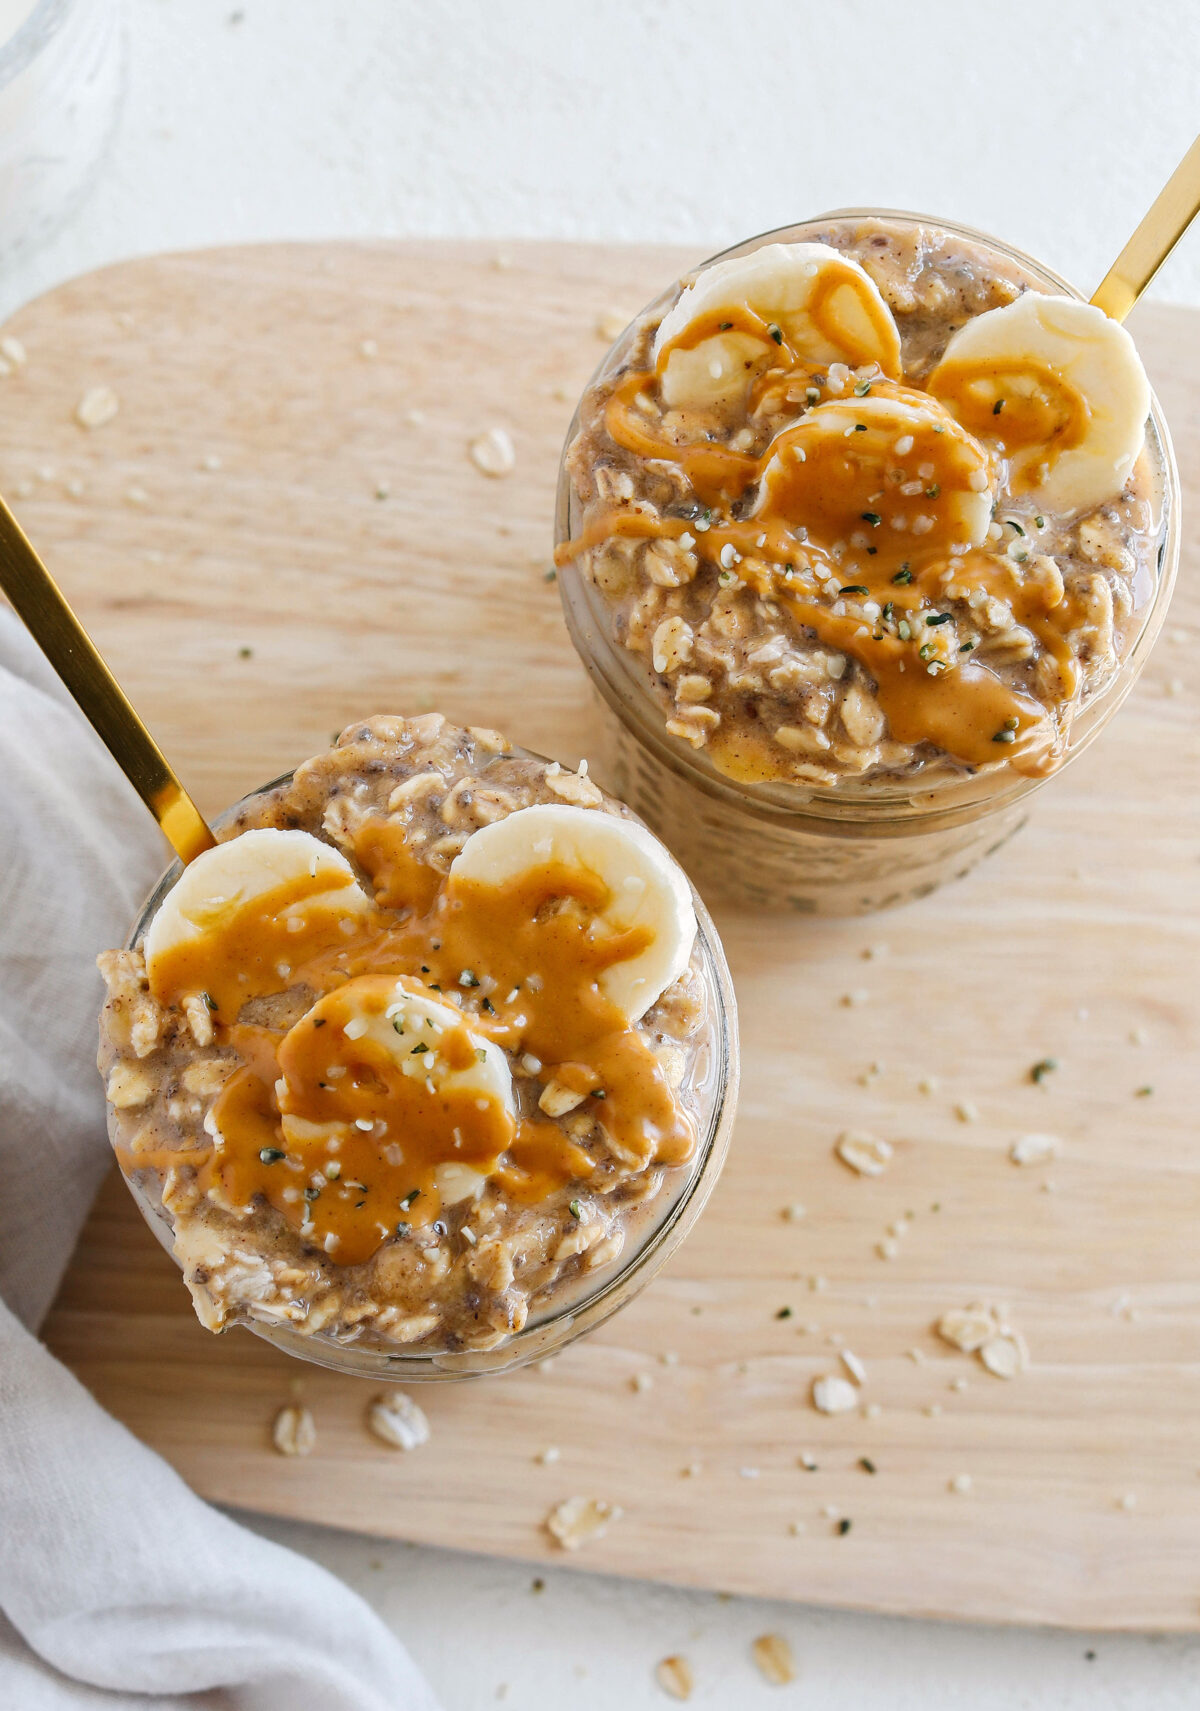 Easy Peanut Butter Banana Overnight Oats that you can easily make-ahead of time in just minutes the night before giving you a deliciously healthy breakfast as soon as you wake up!